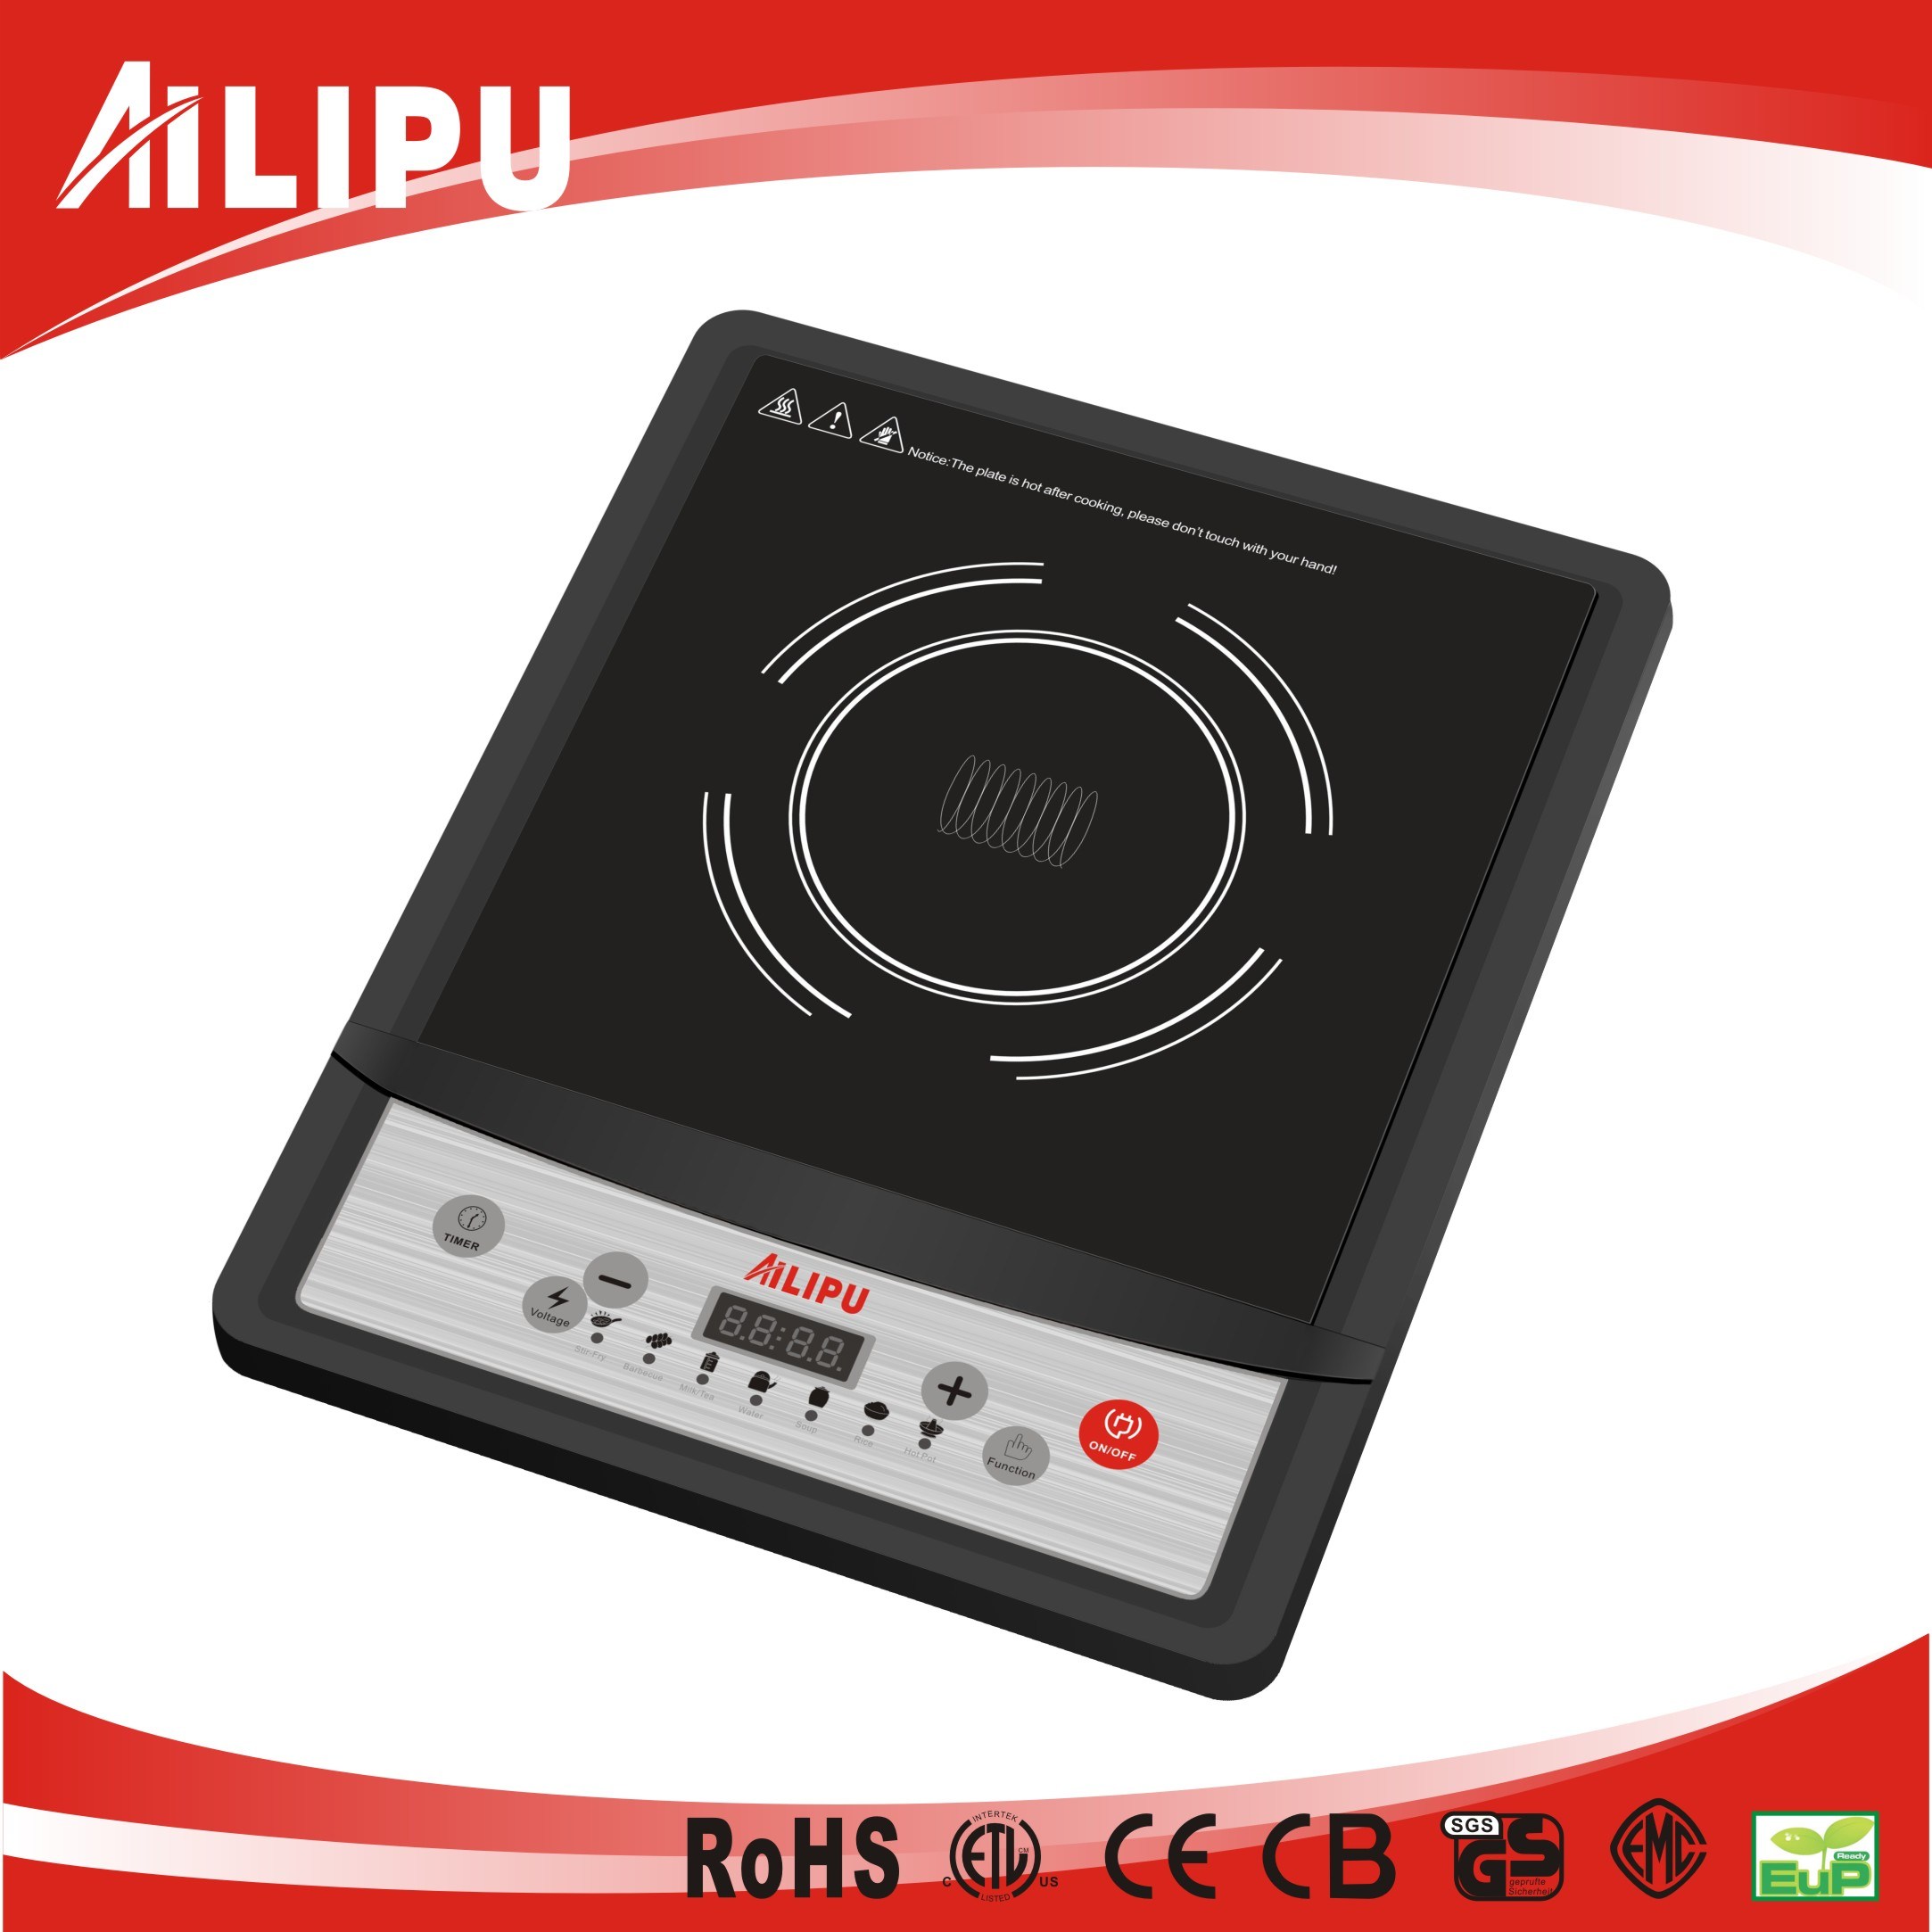 CB CE Certificate Push Button Induction Cooktop